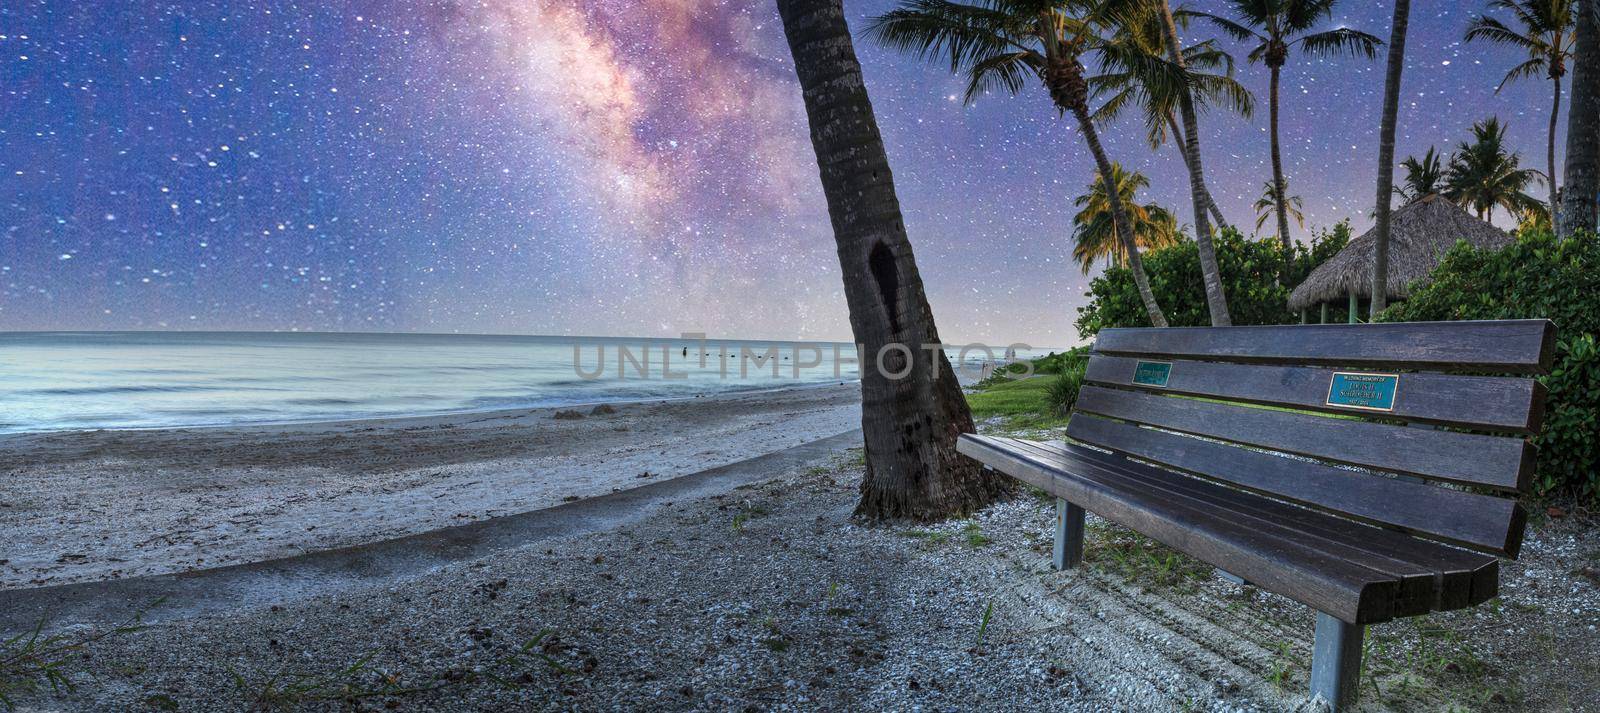 Milky way over Bench overlooking the ocean at Port Royal Beach in Naples, Florida at sunrise.